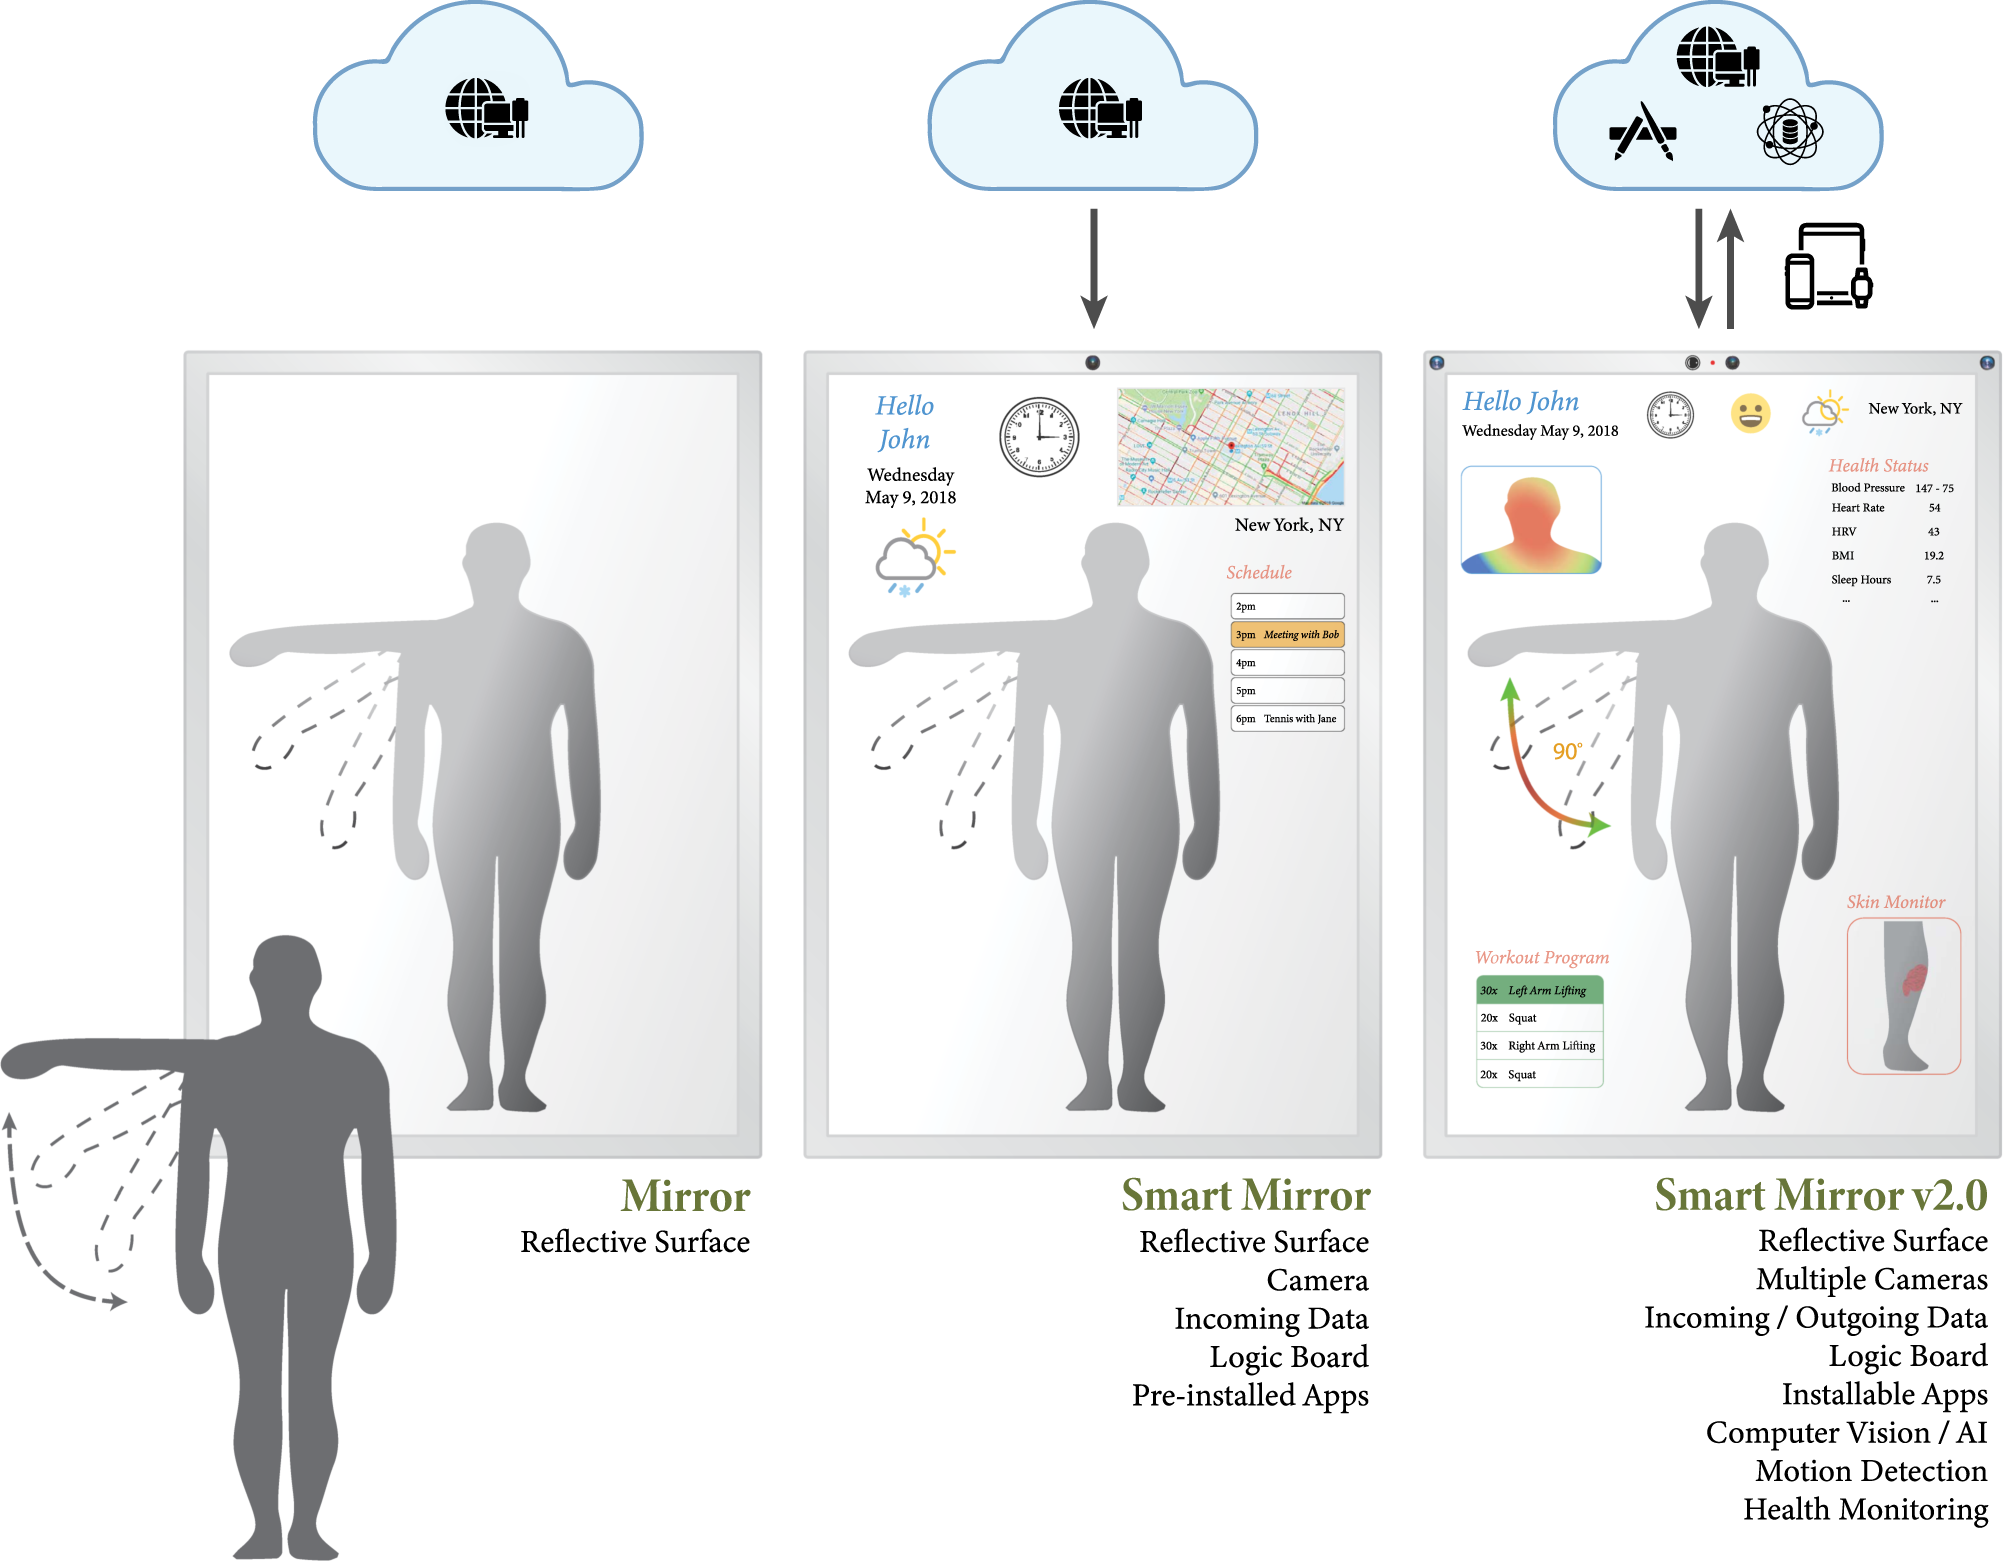 Reflecting health: smart mirrors for personalized medicine